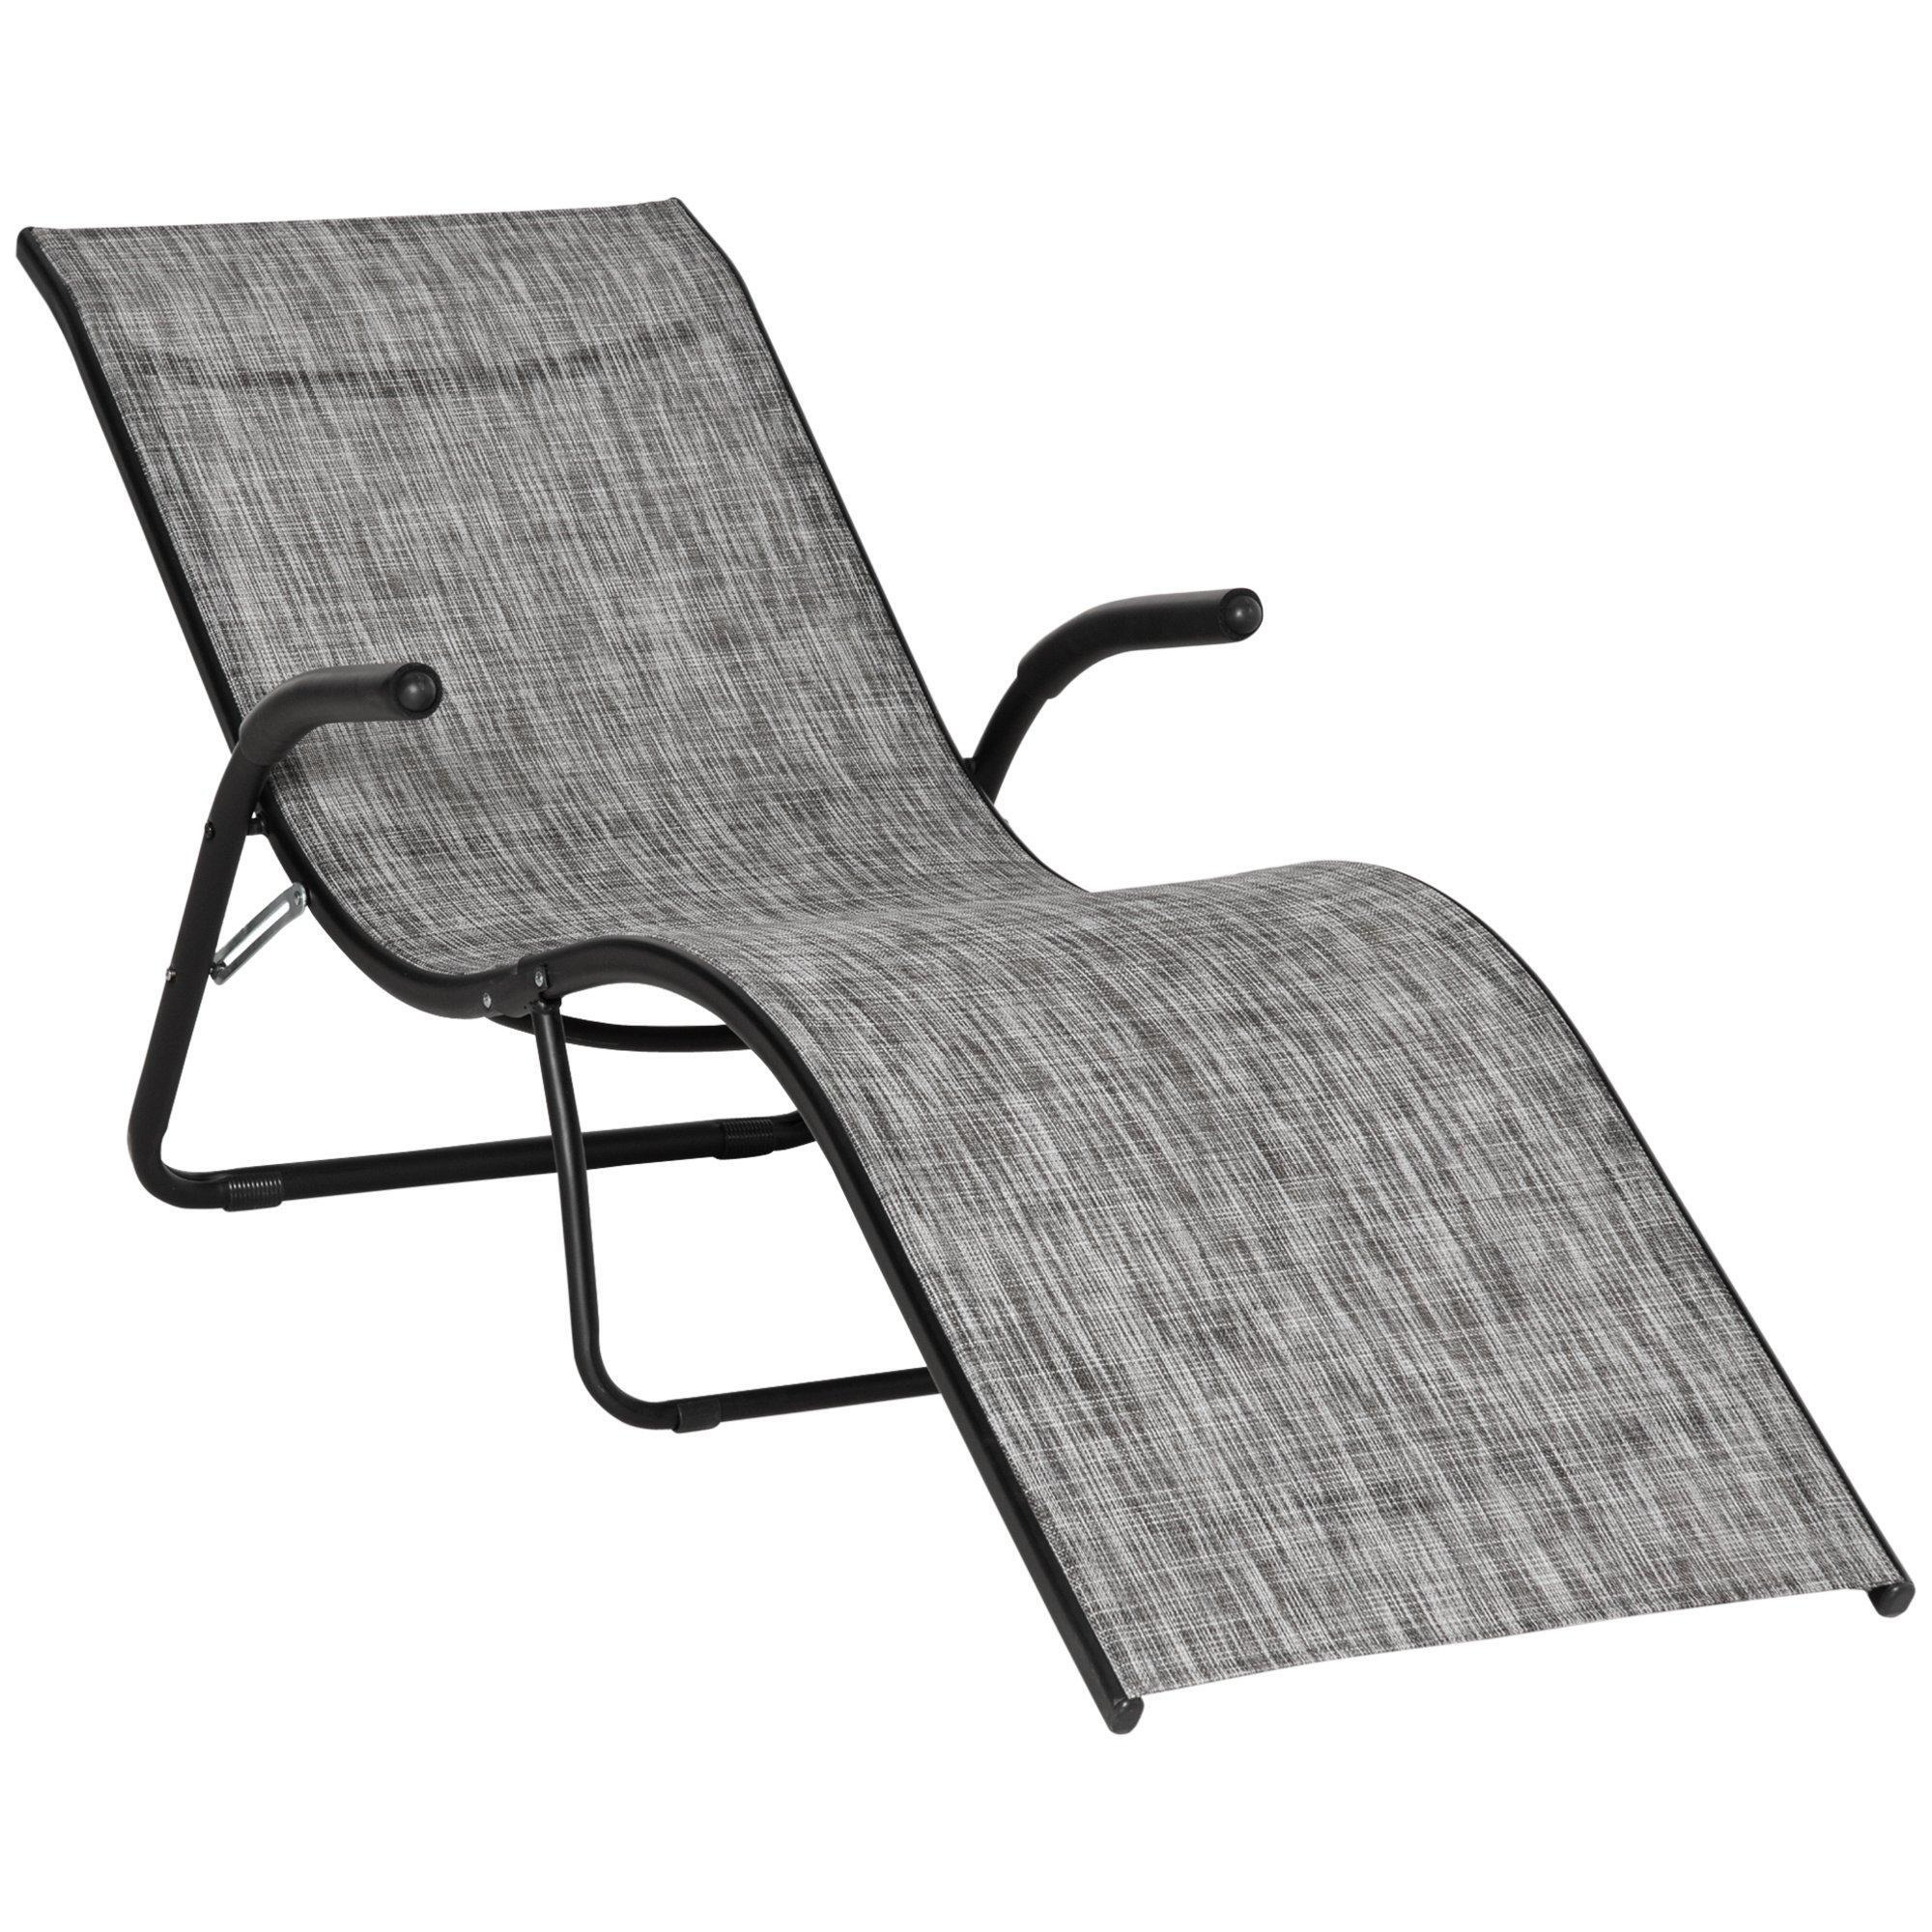 Folding Lounge Chair, Outdoor Chaise Lounge for Beach, Poolside - image 1